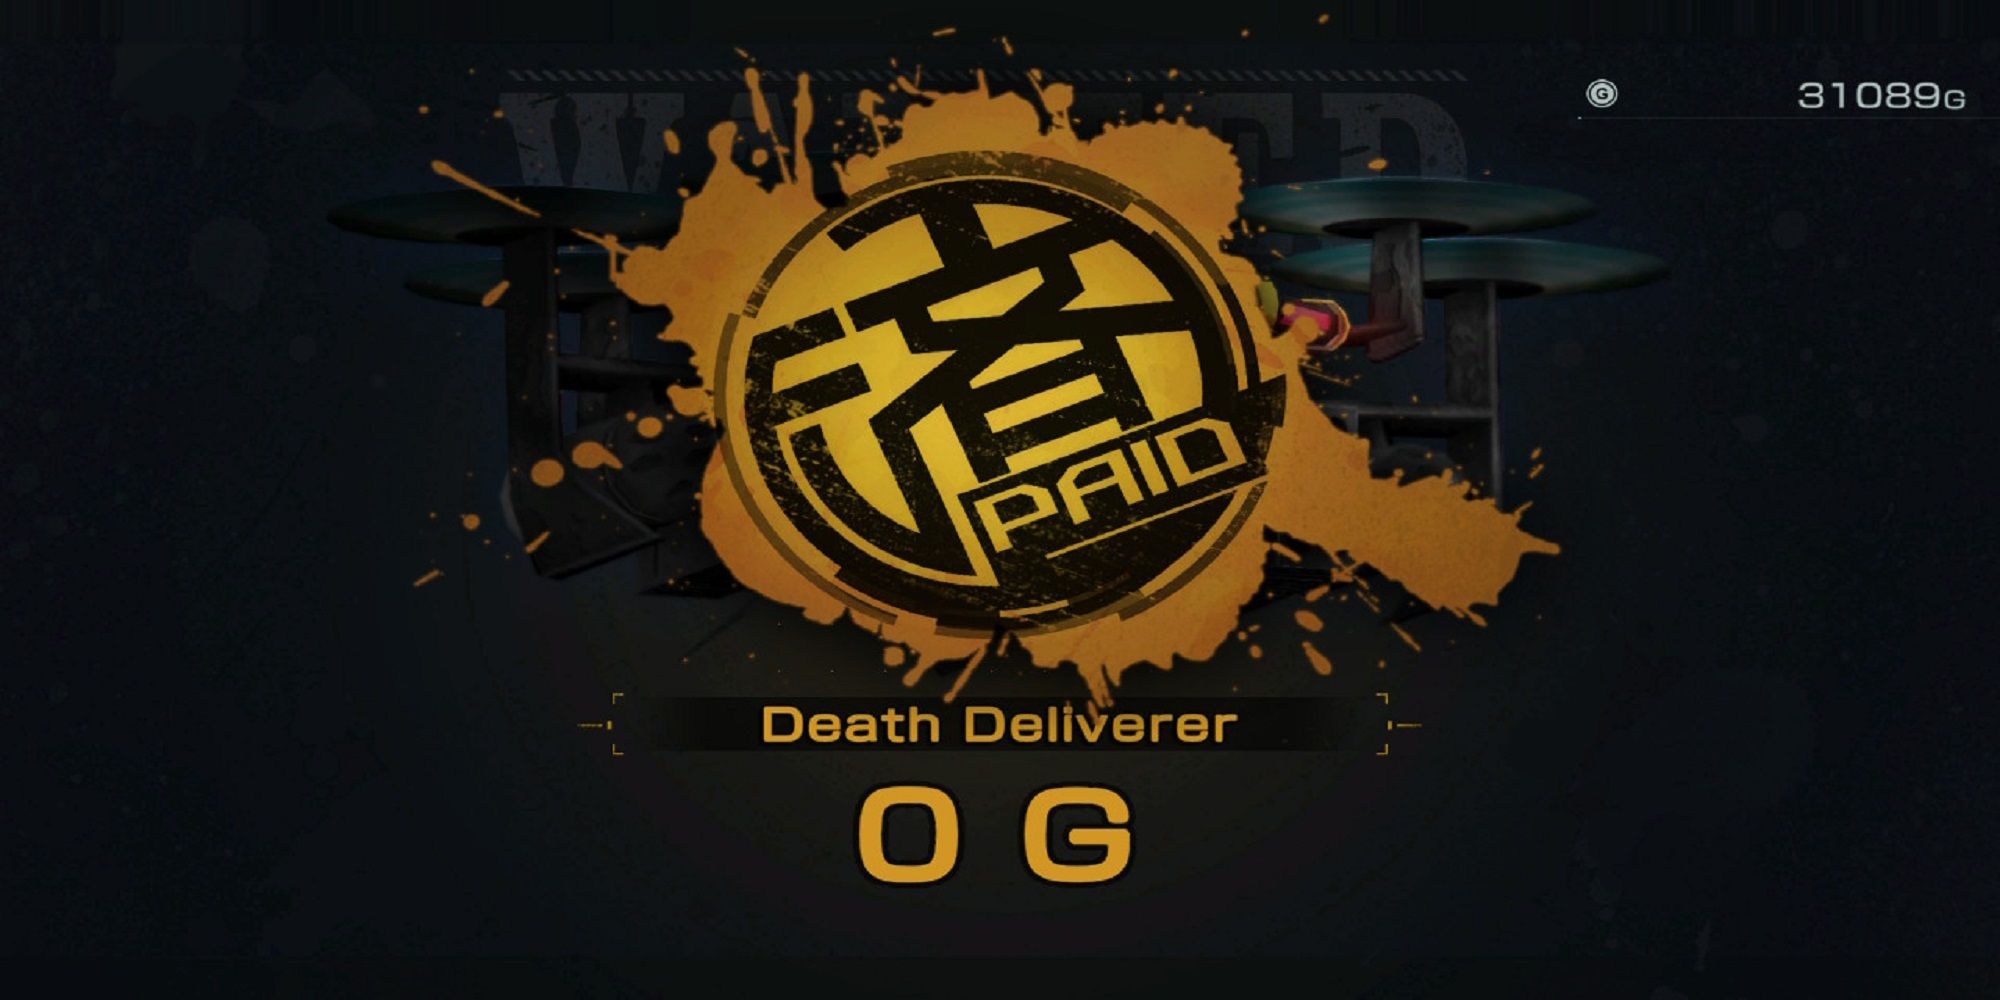 A "paid" emblem gets stamped onto Death Deliverer's WANTED poster in Metal Max Xeno Reborn.